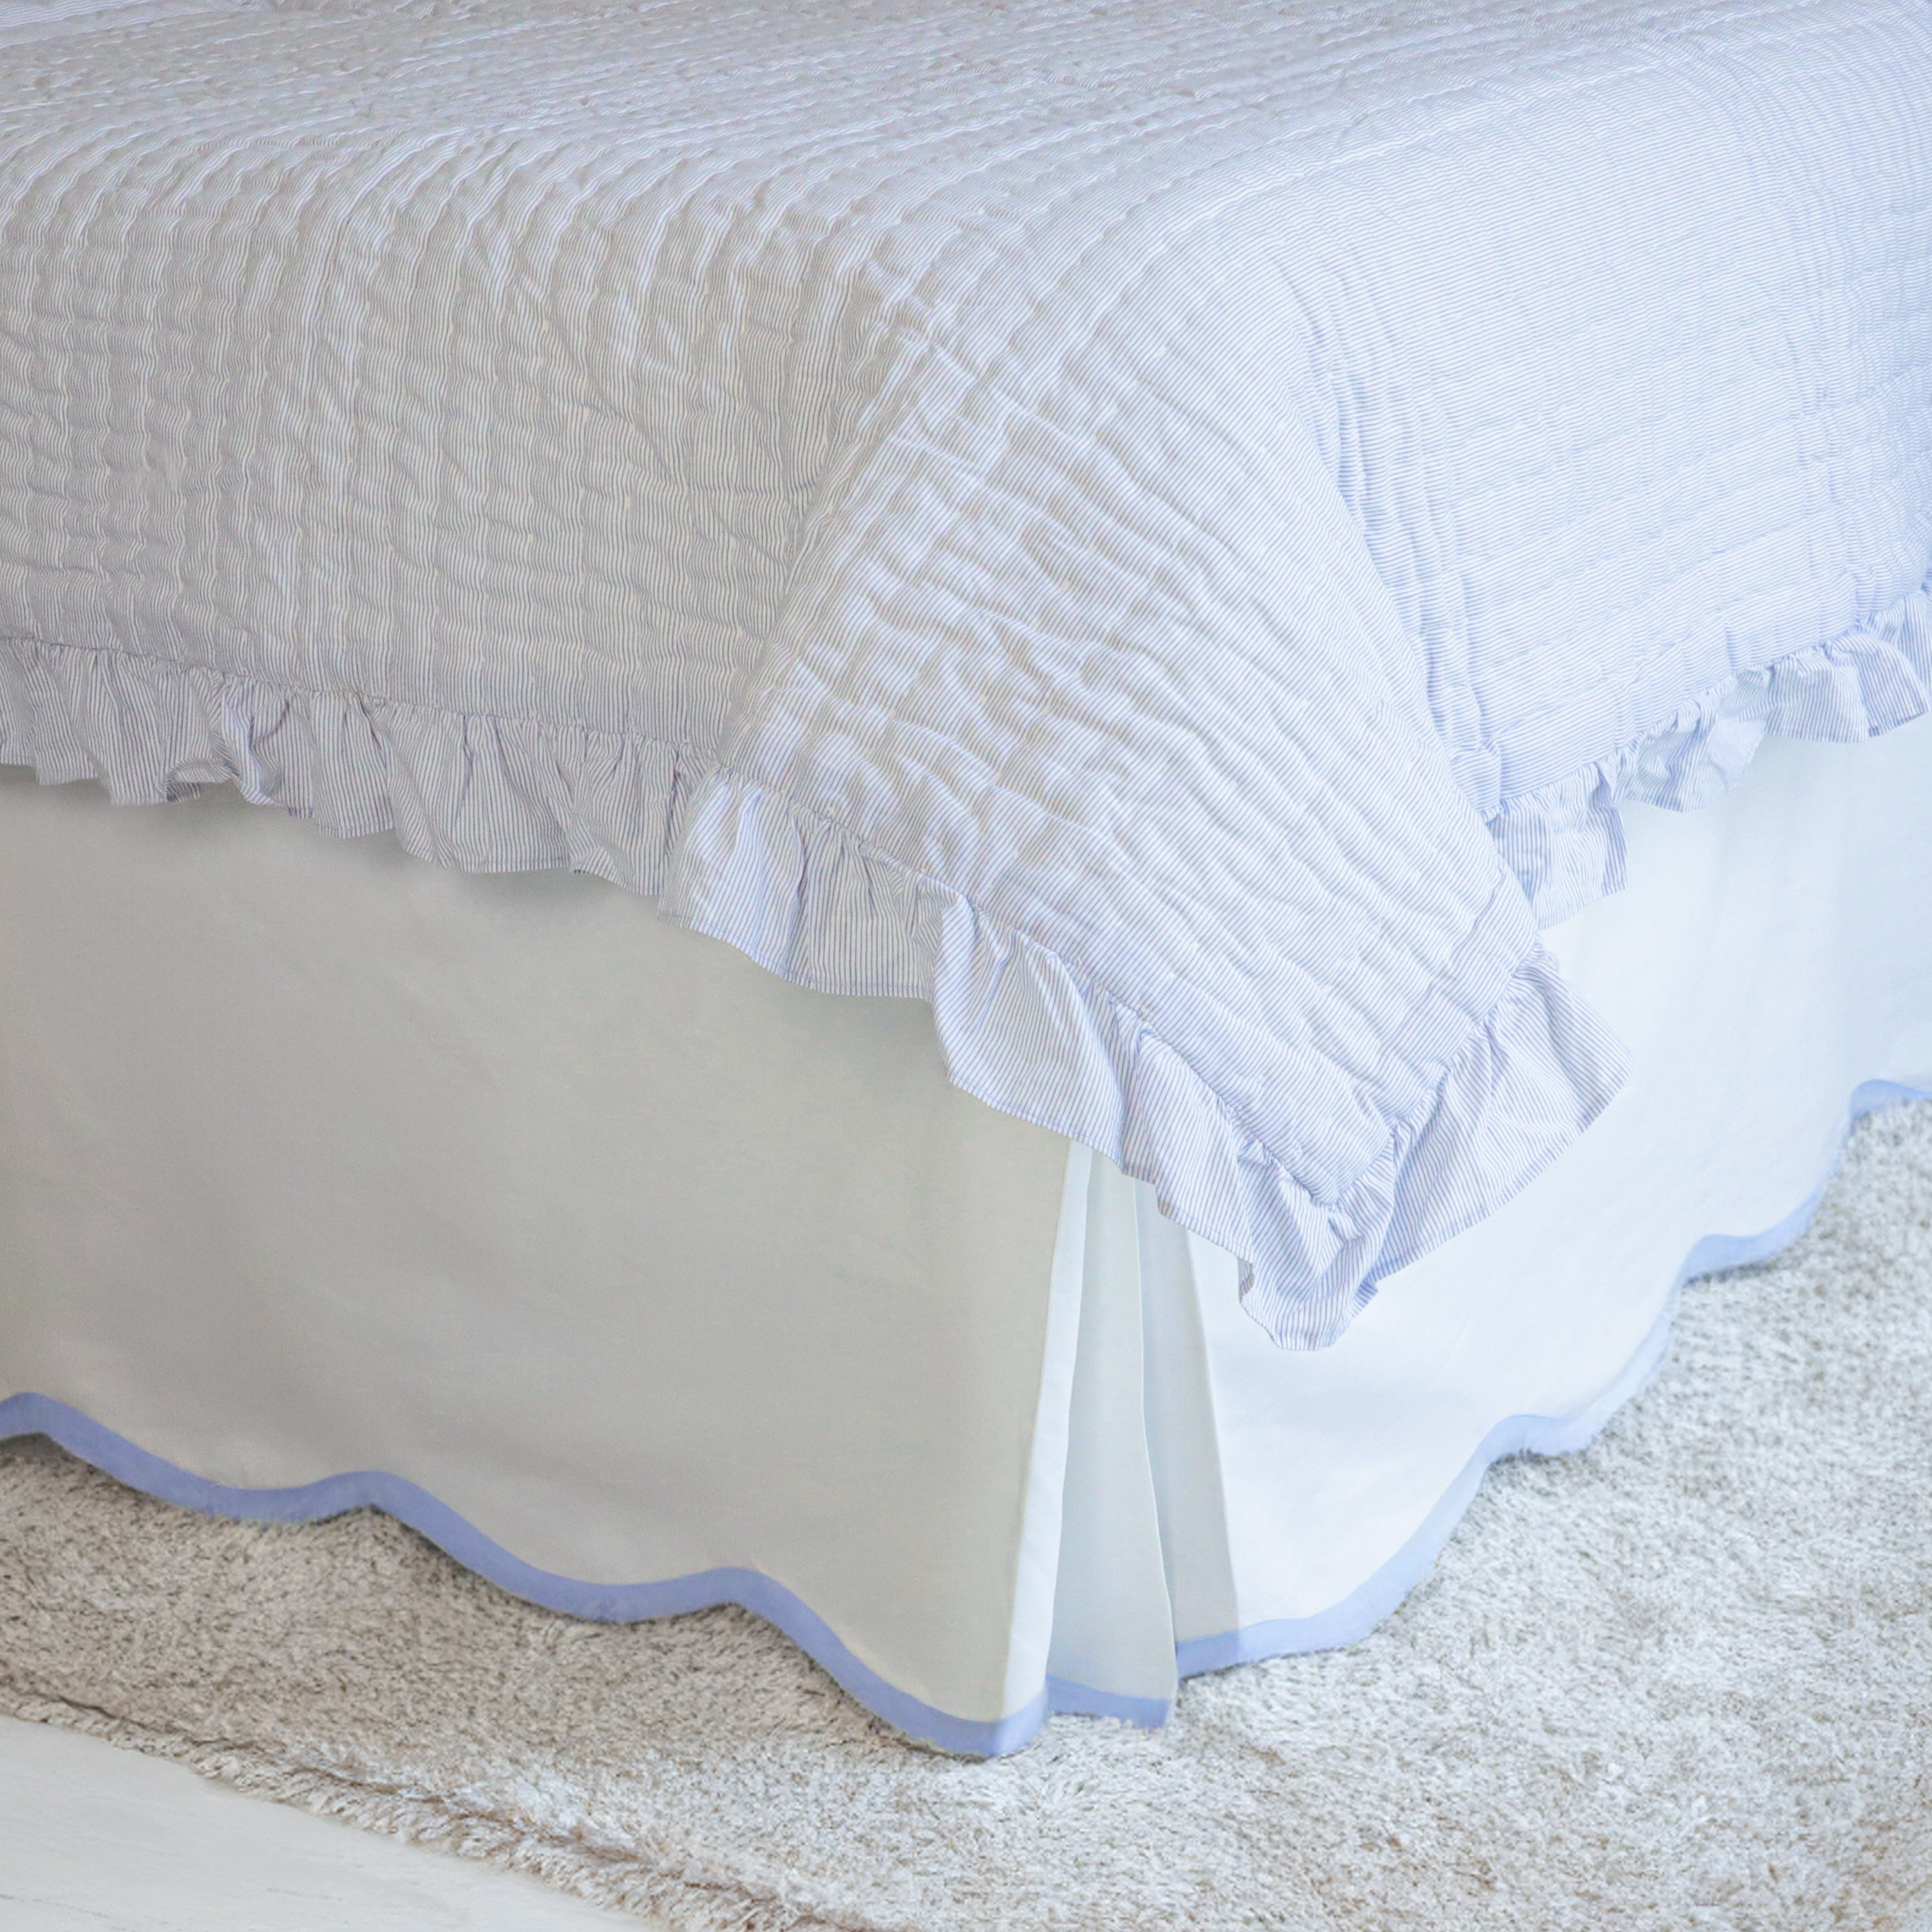 White cotton blend bed skirt with scallop edge on three sides. The bed skirt has a blue trim on three sides.